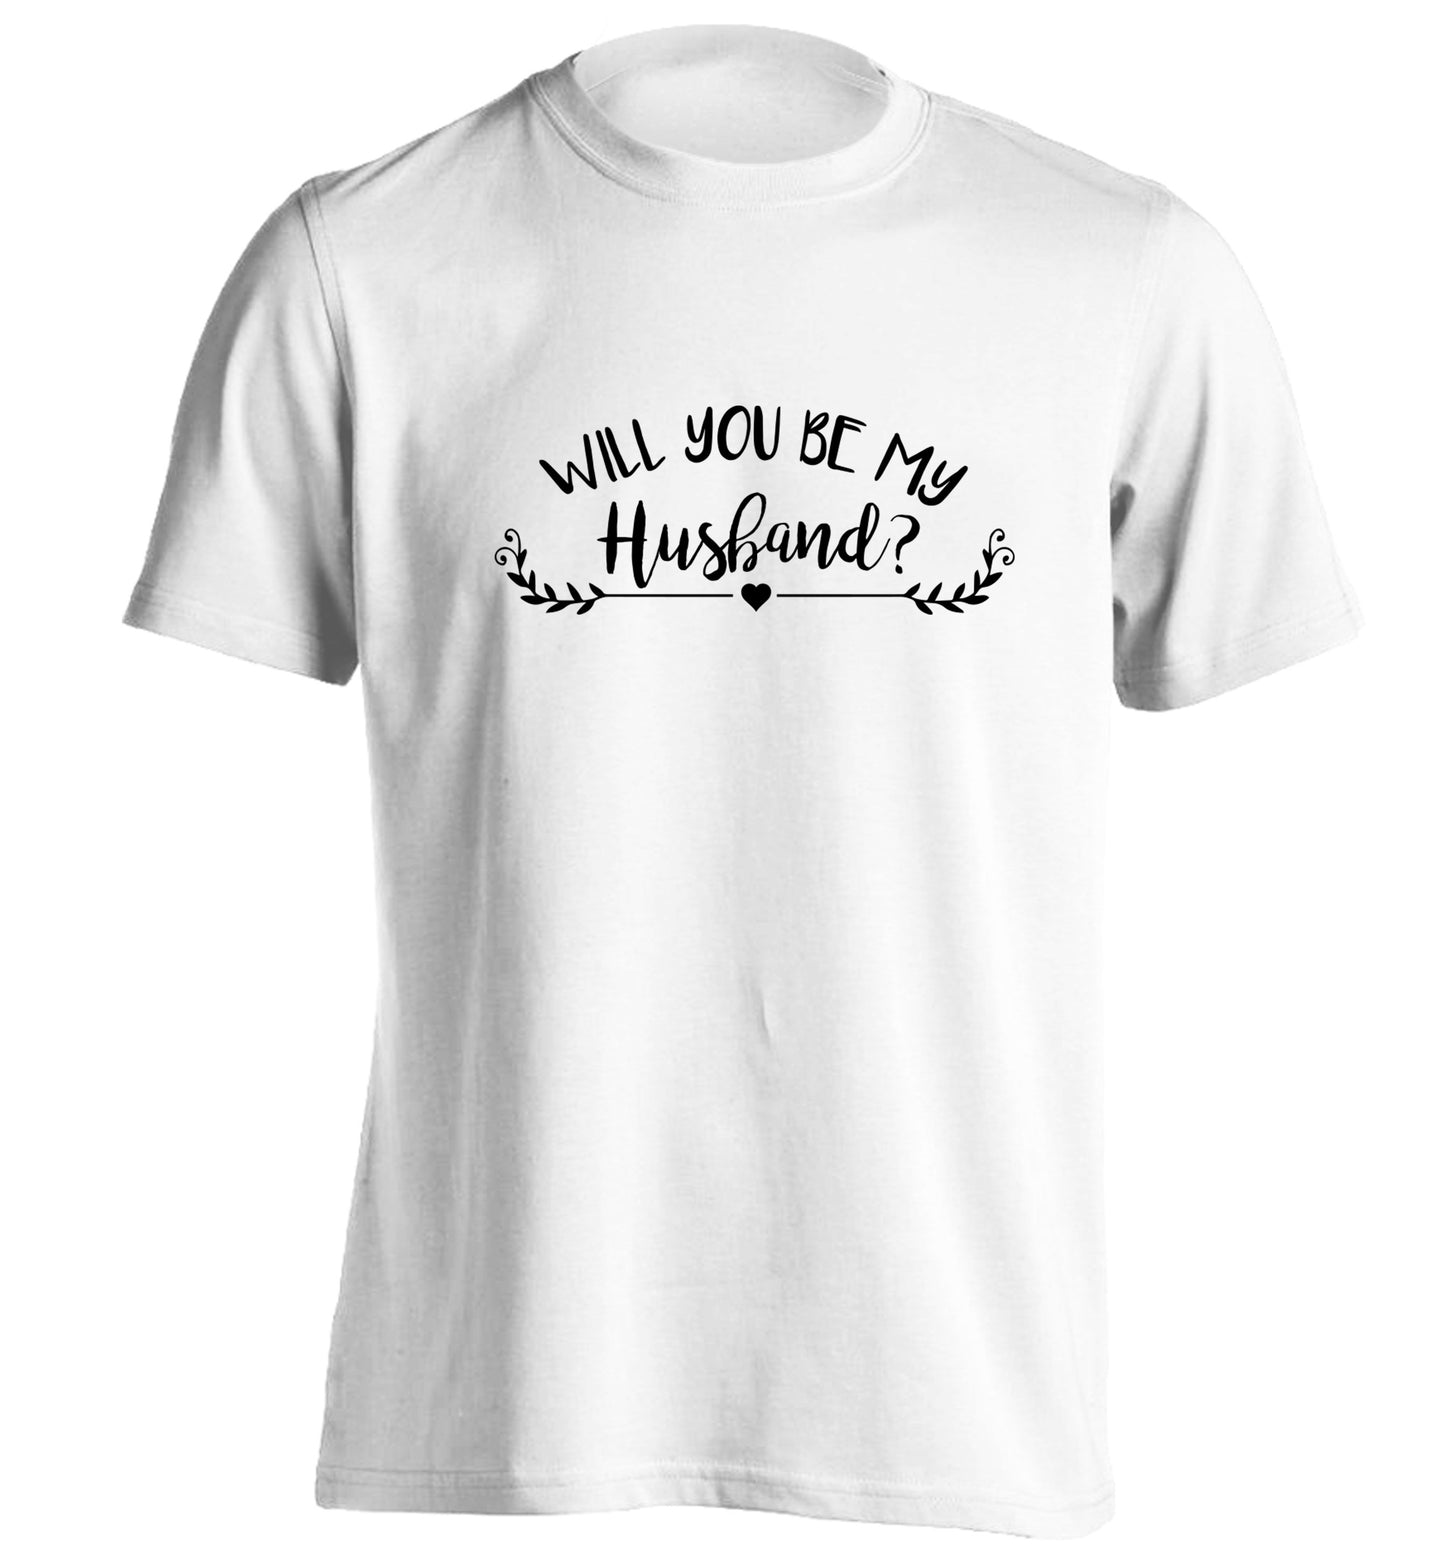 Will you be my husband? adults unisex white Tshirt 2XL